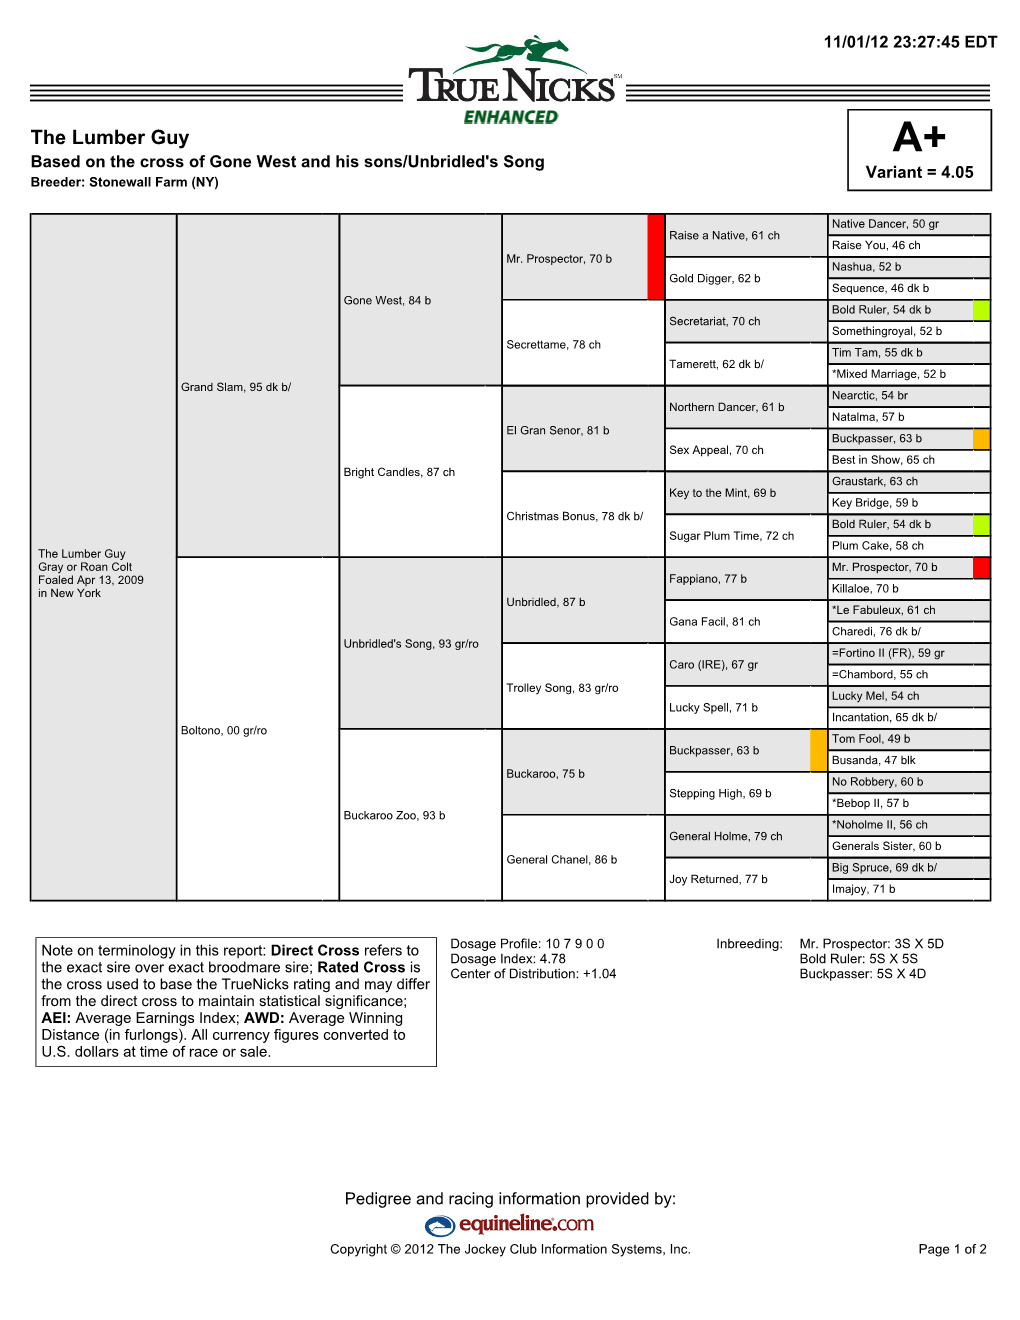 The Lumber Guy A+ Based on the Cross of Gone West and His Sons/Unbridled's Song Variant = 4.05 Breeder: Stonewall Farm (NY)